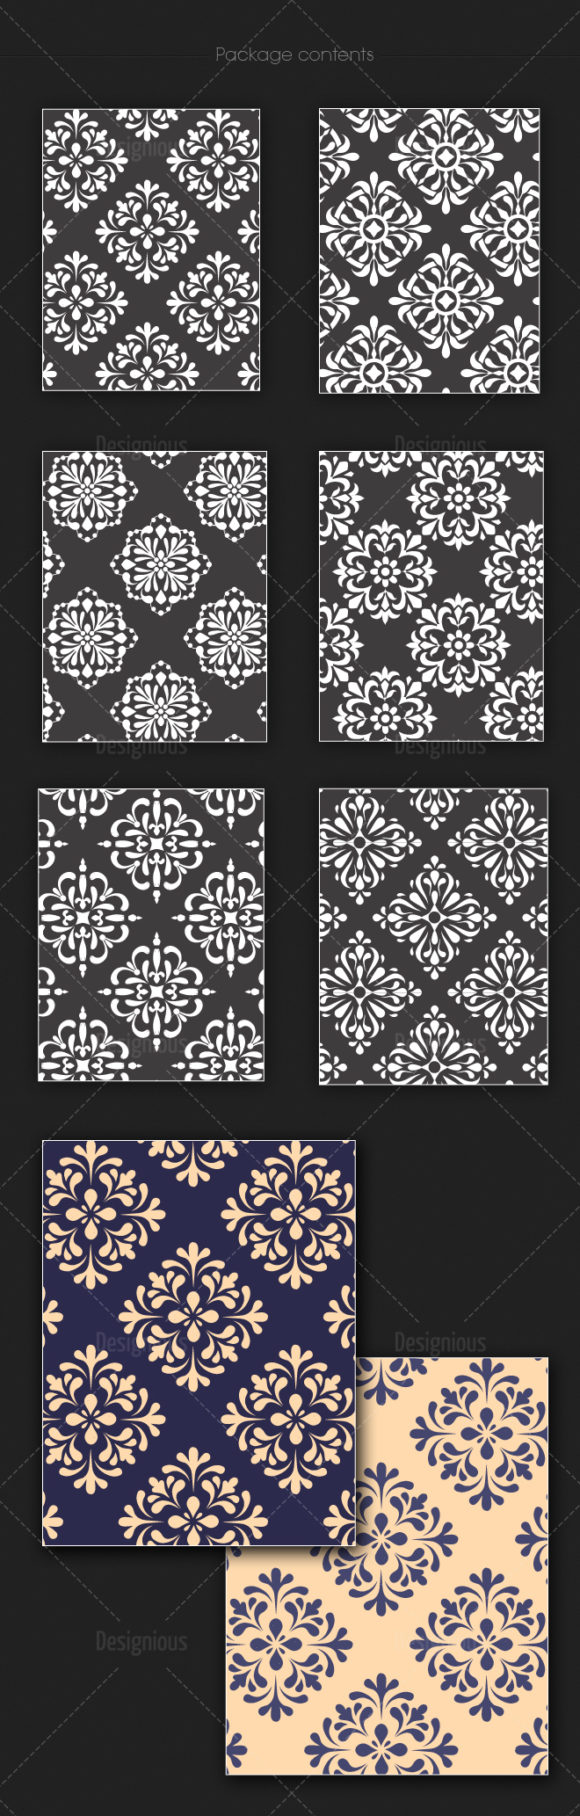 Seamless Patterns Vector Pack 137 2